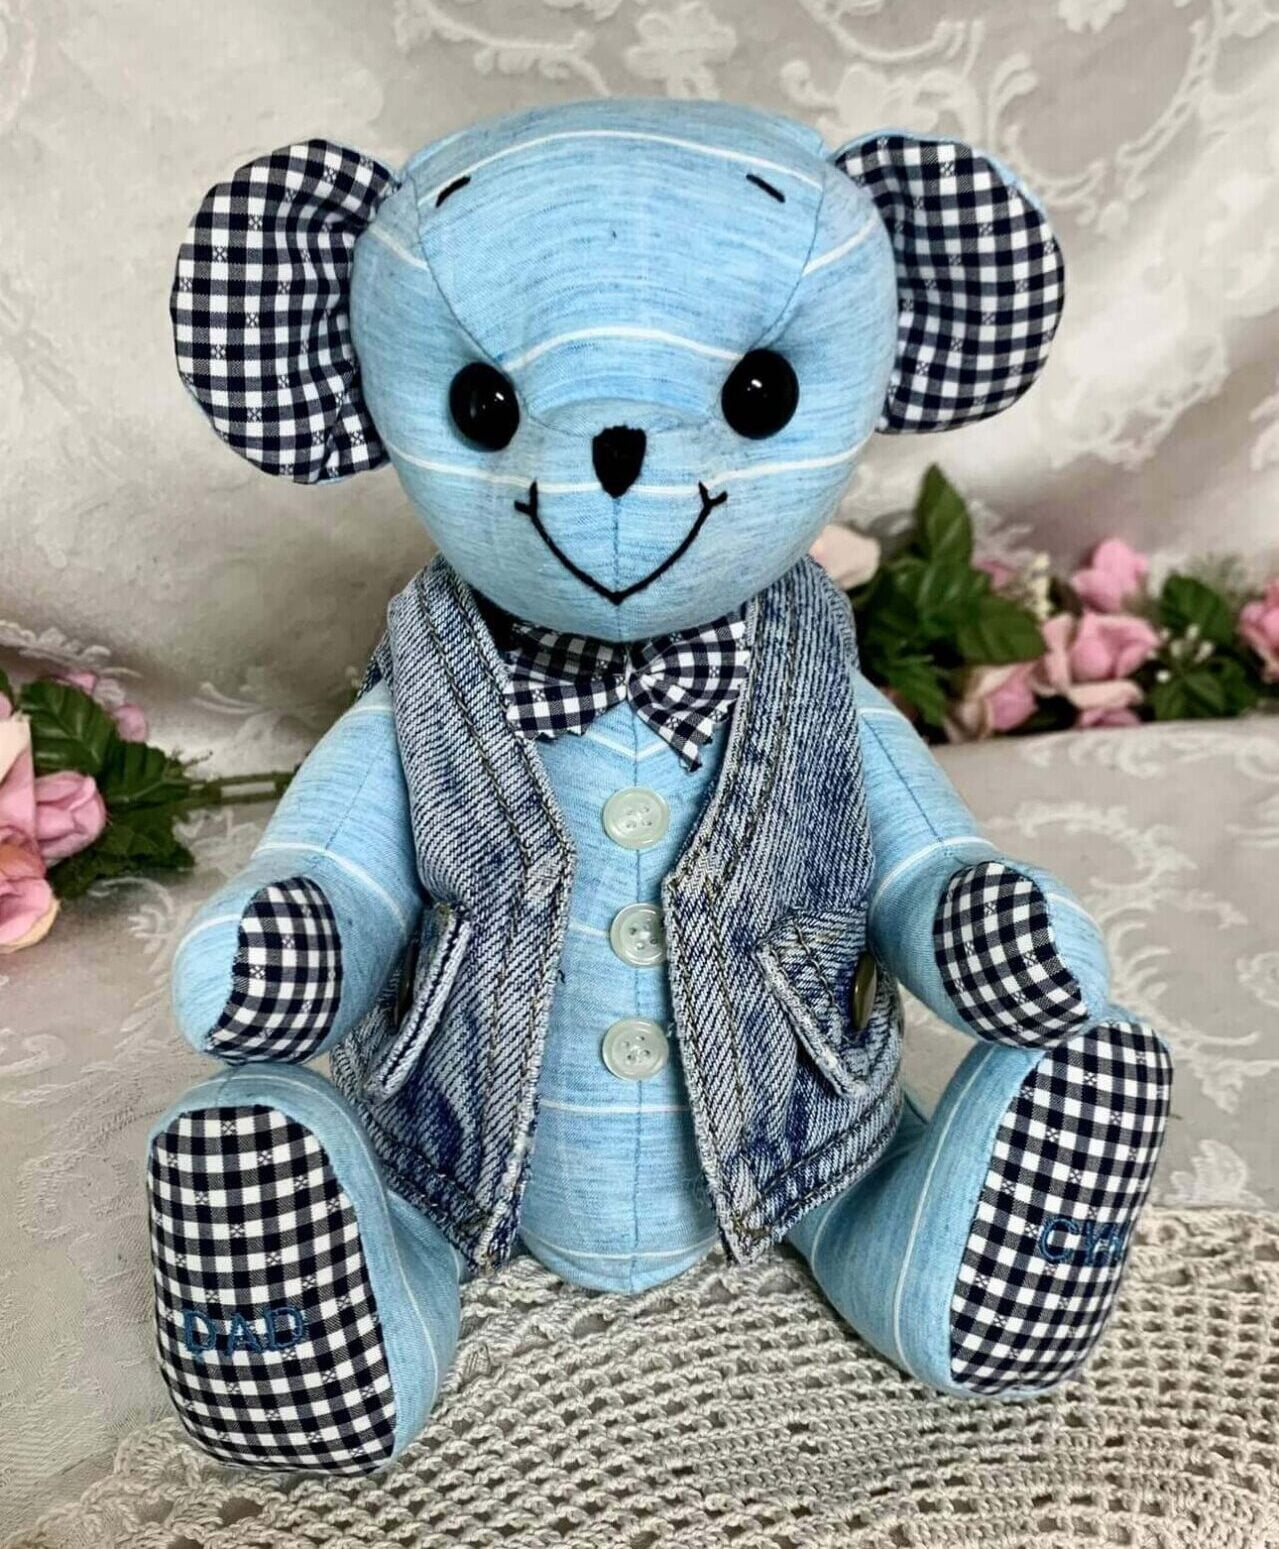 Memory Teddy Bear made from shirts and jean jacket.